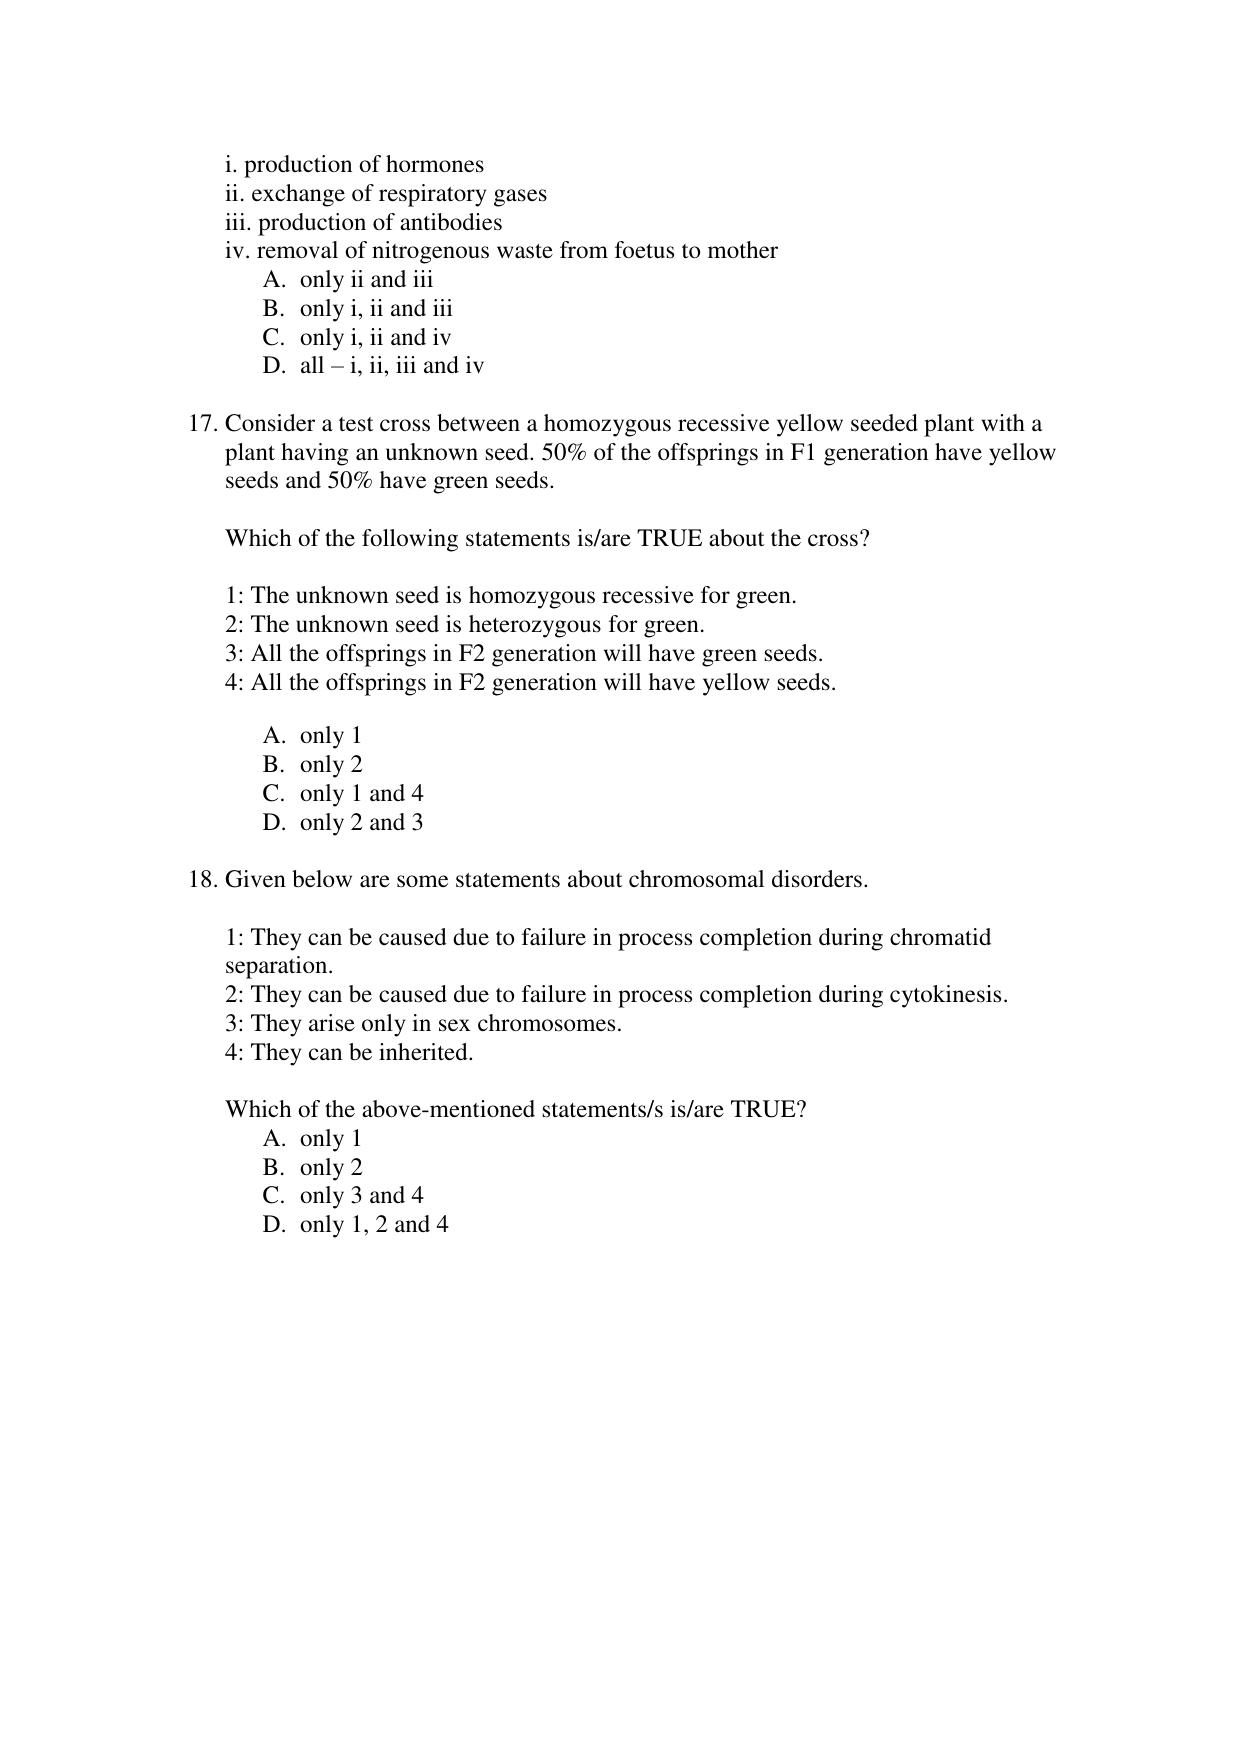 CBSE Class 12 Biology Term 1 Practice Questions 2021-22 - Page 6